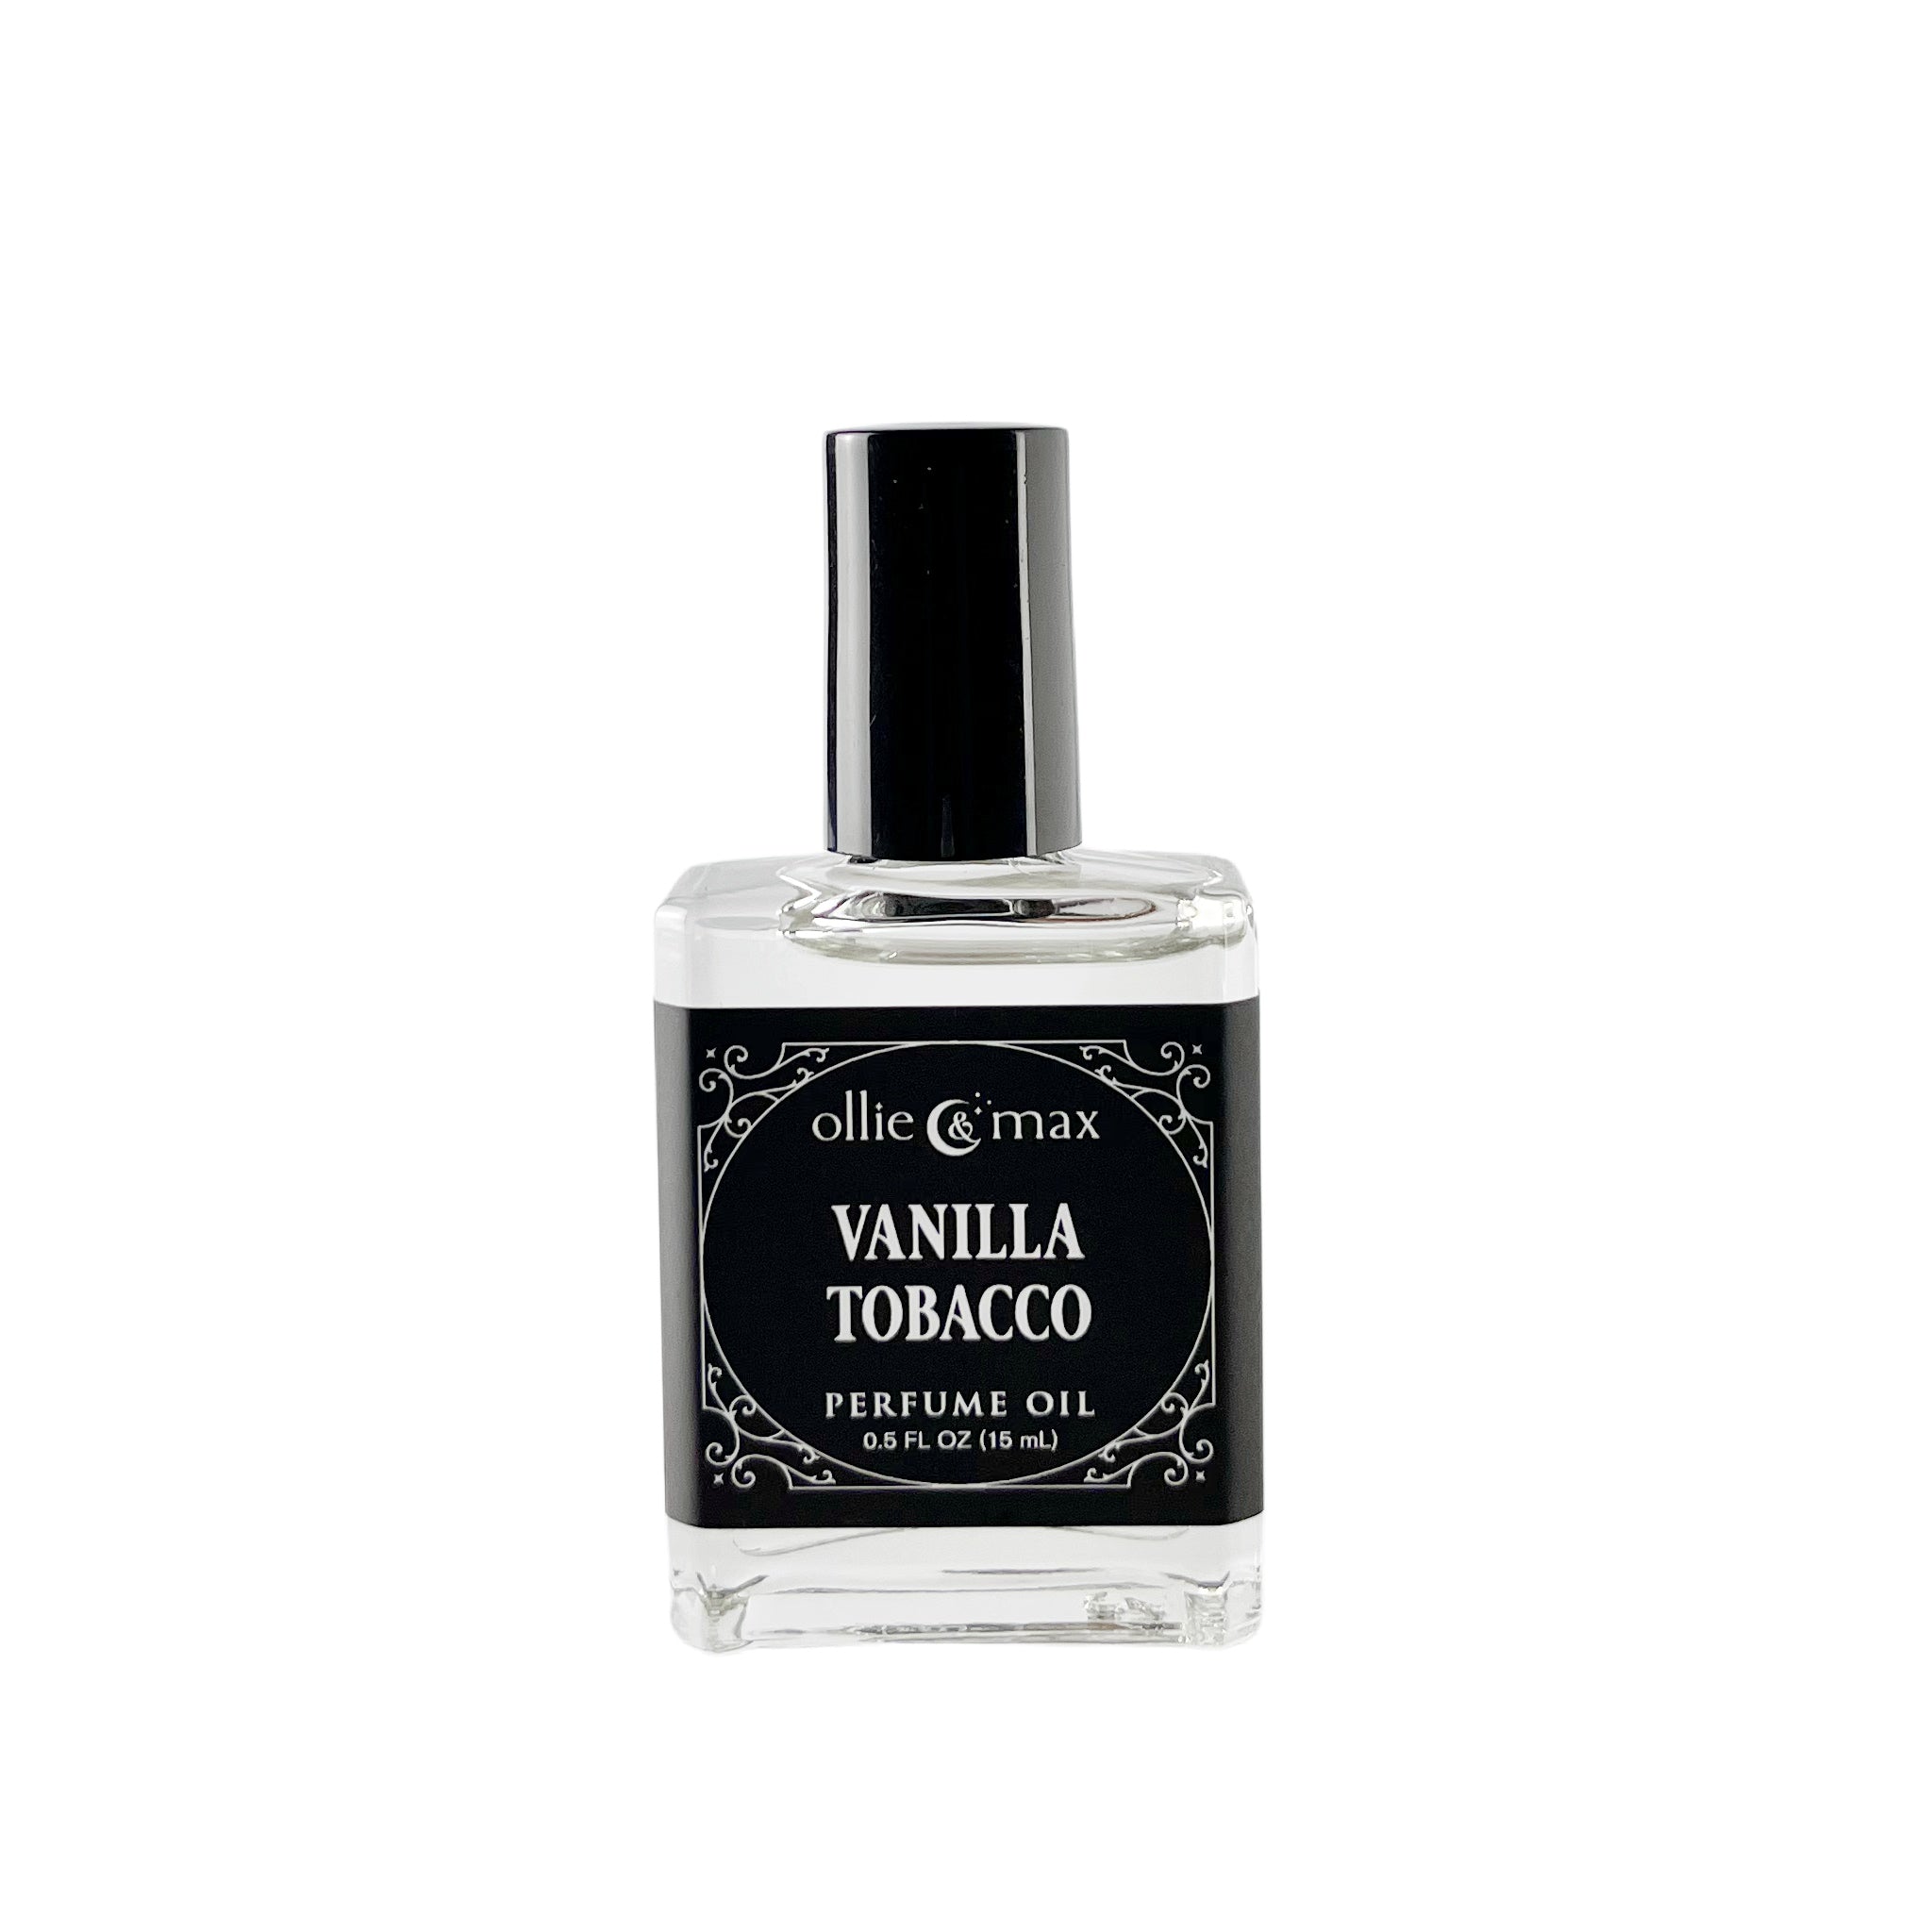 glass bottle with black cap and label, vanilla tobacco perfume, 15ml